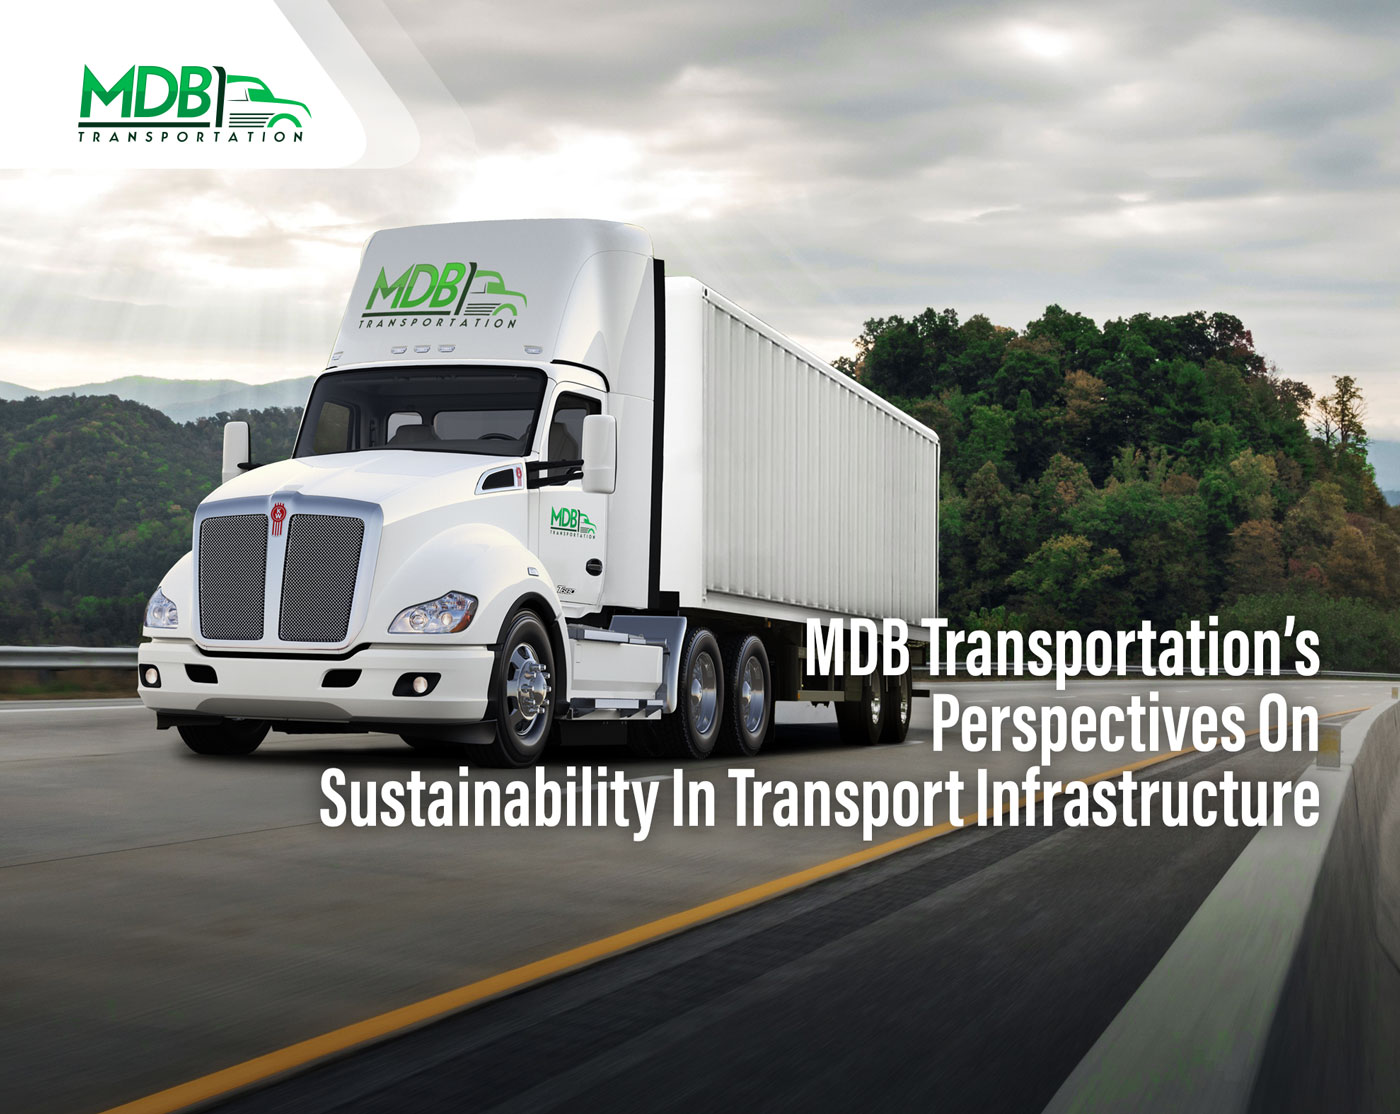 MDB Transportation’s Perspectives On Sustainability In Transport Infrastructure